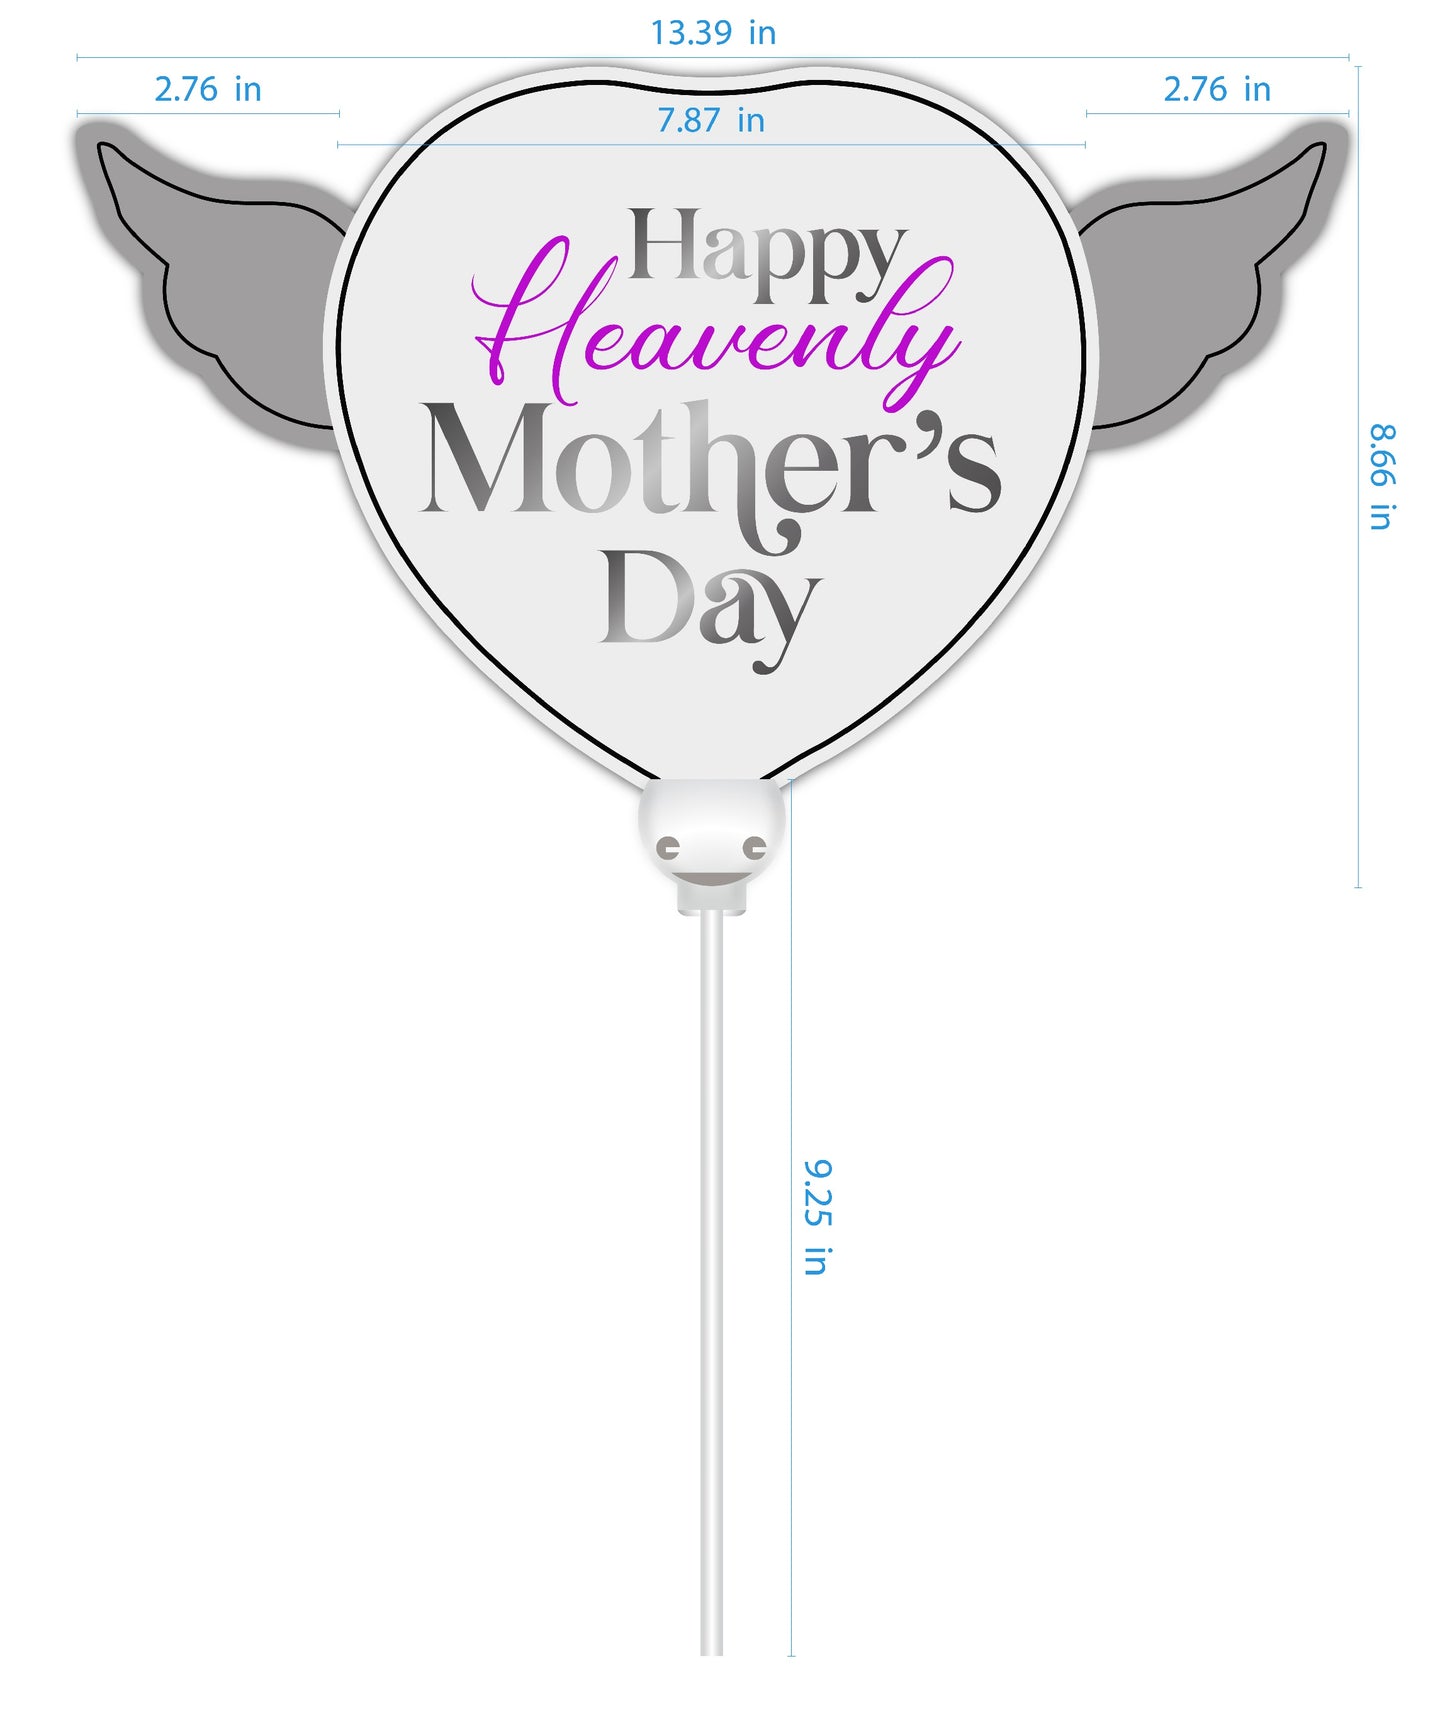 Heavenly Balloons ® on a Stick Happy Heavenly Mother's Day (pink) balloon heart shaped with angel wings dimensions